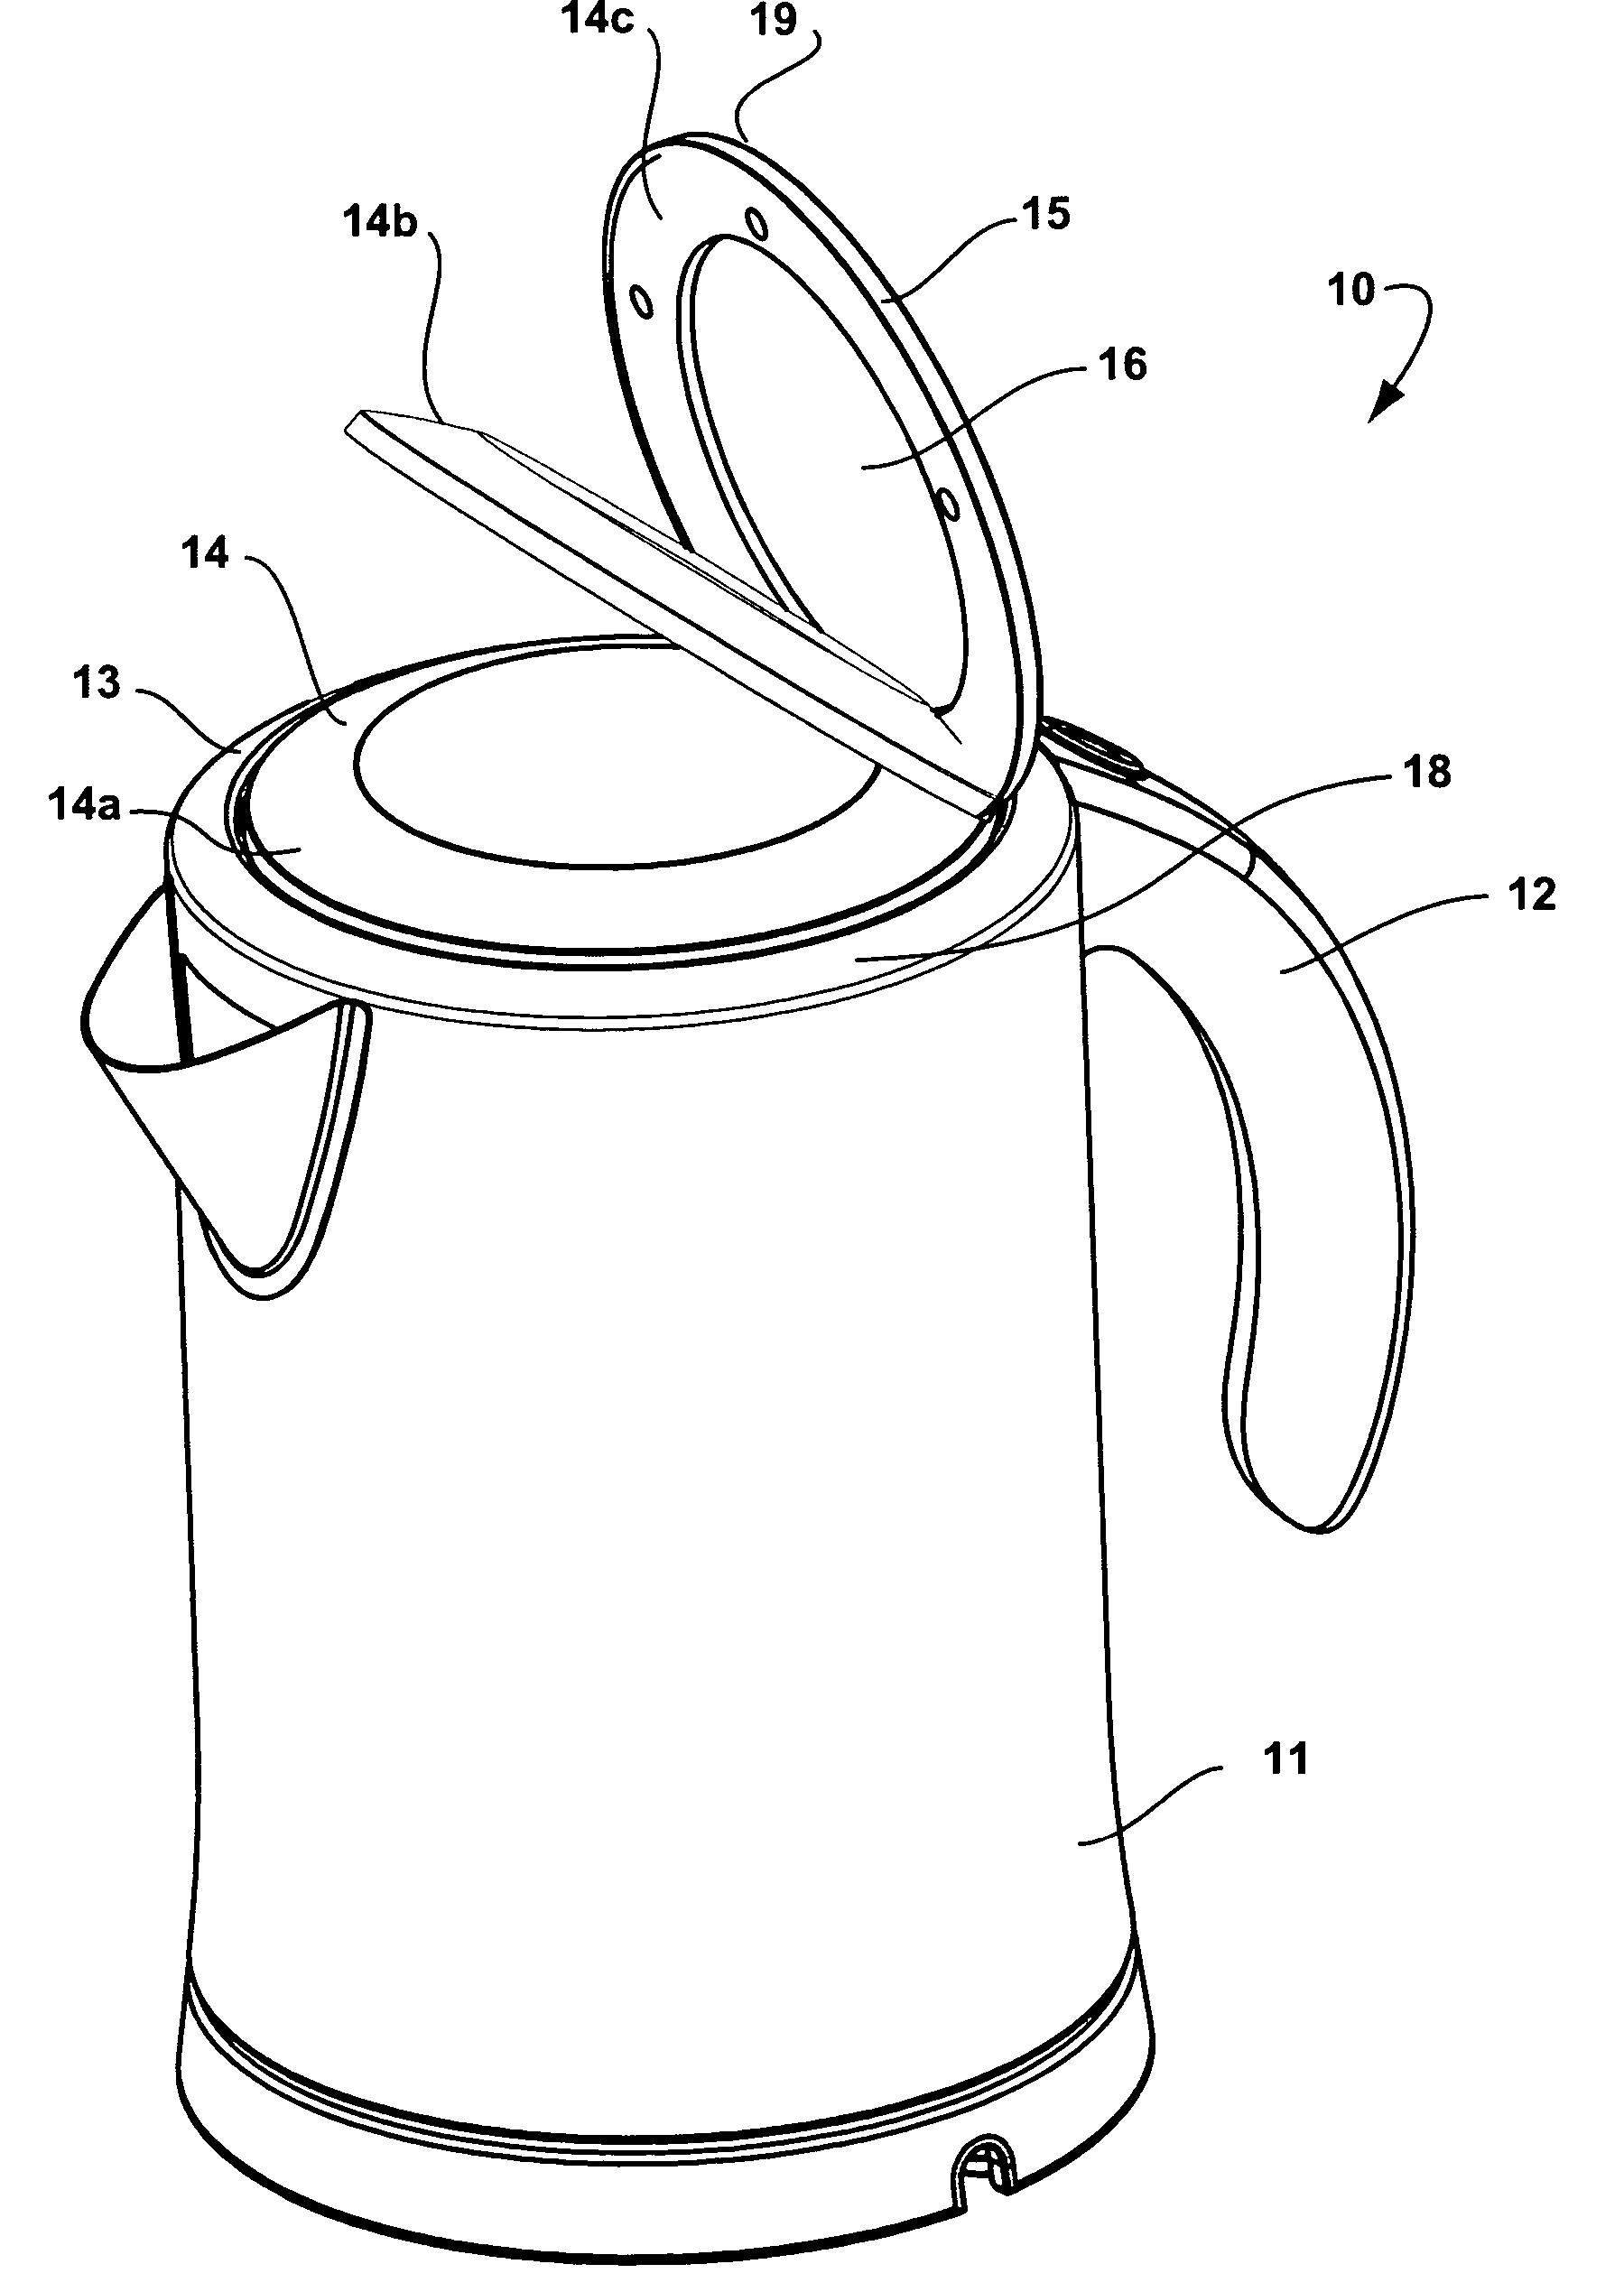 Kettle with lid damping mechanism